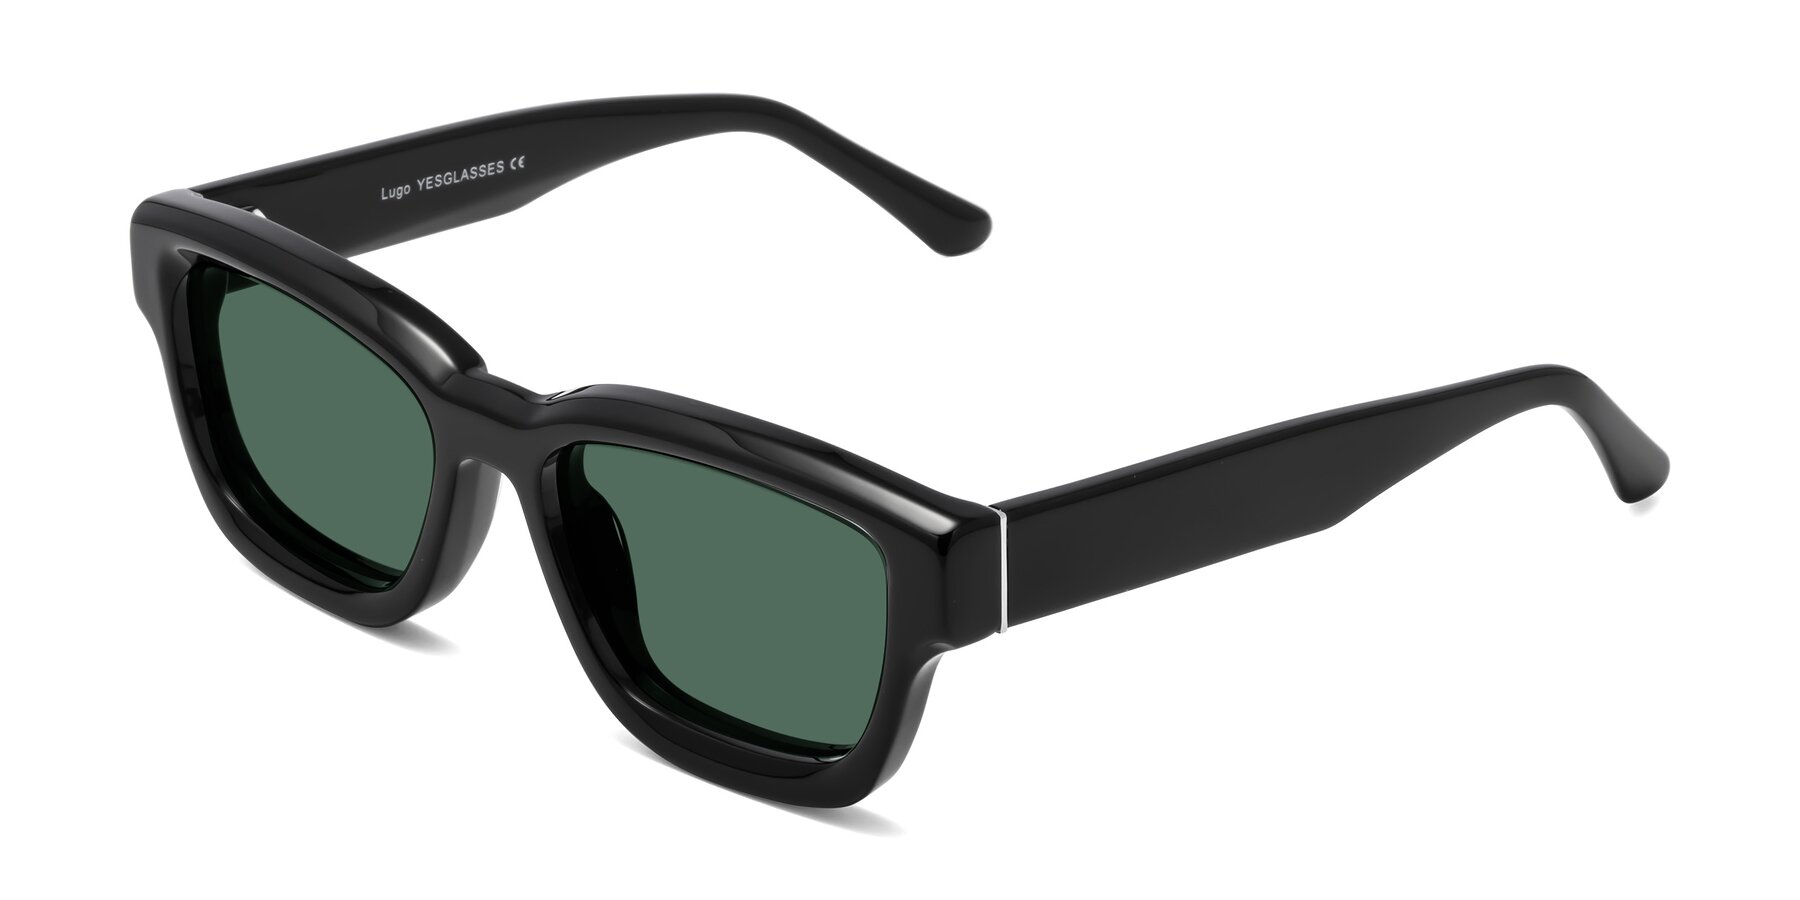 Angle of Lugo in Black with Green Polarized Lenses